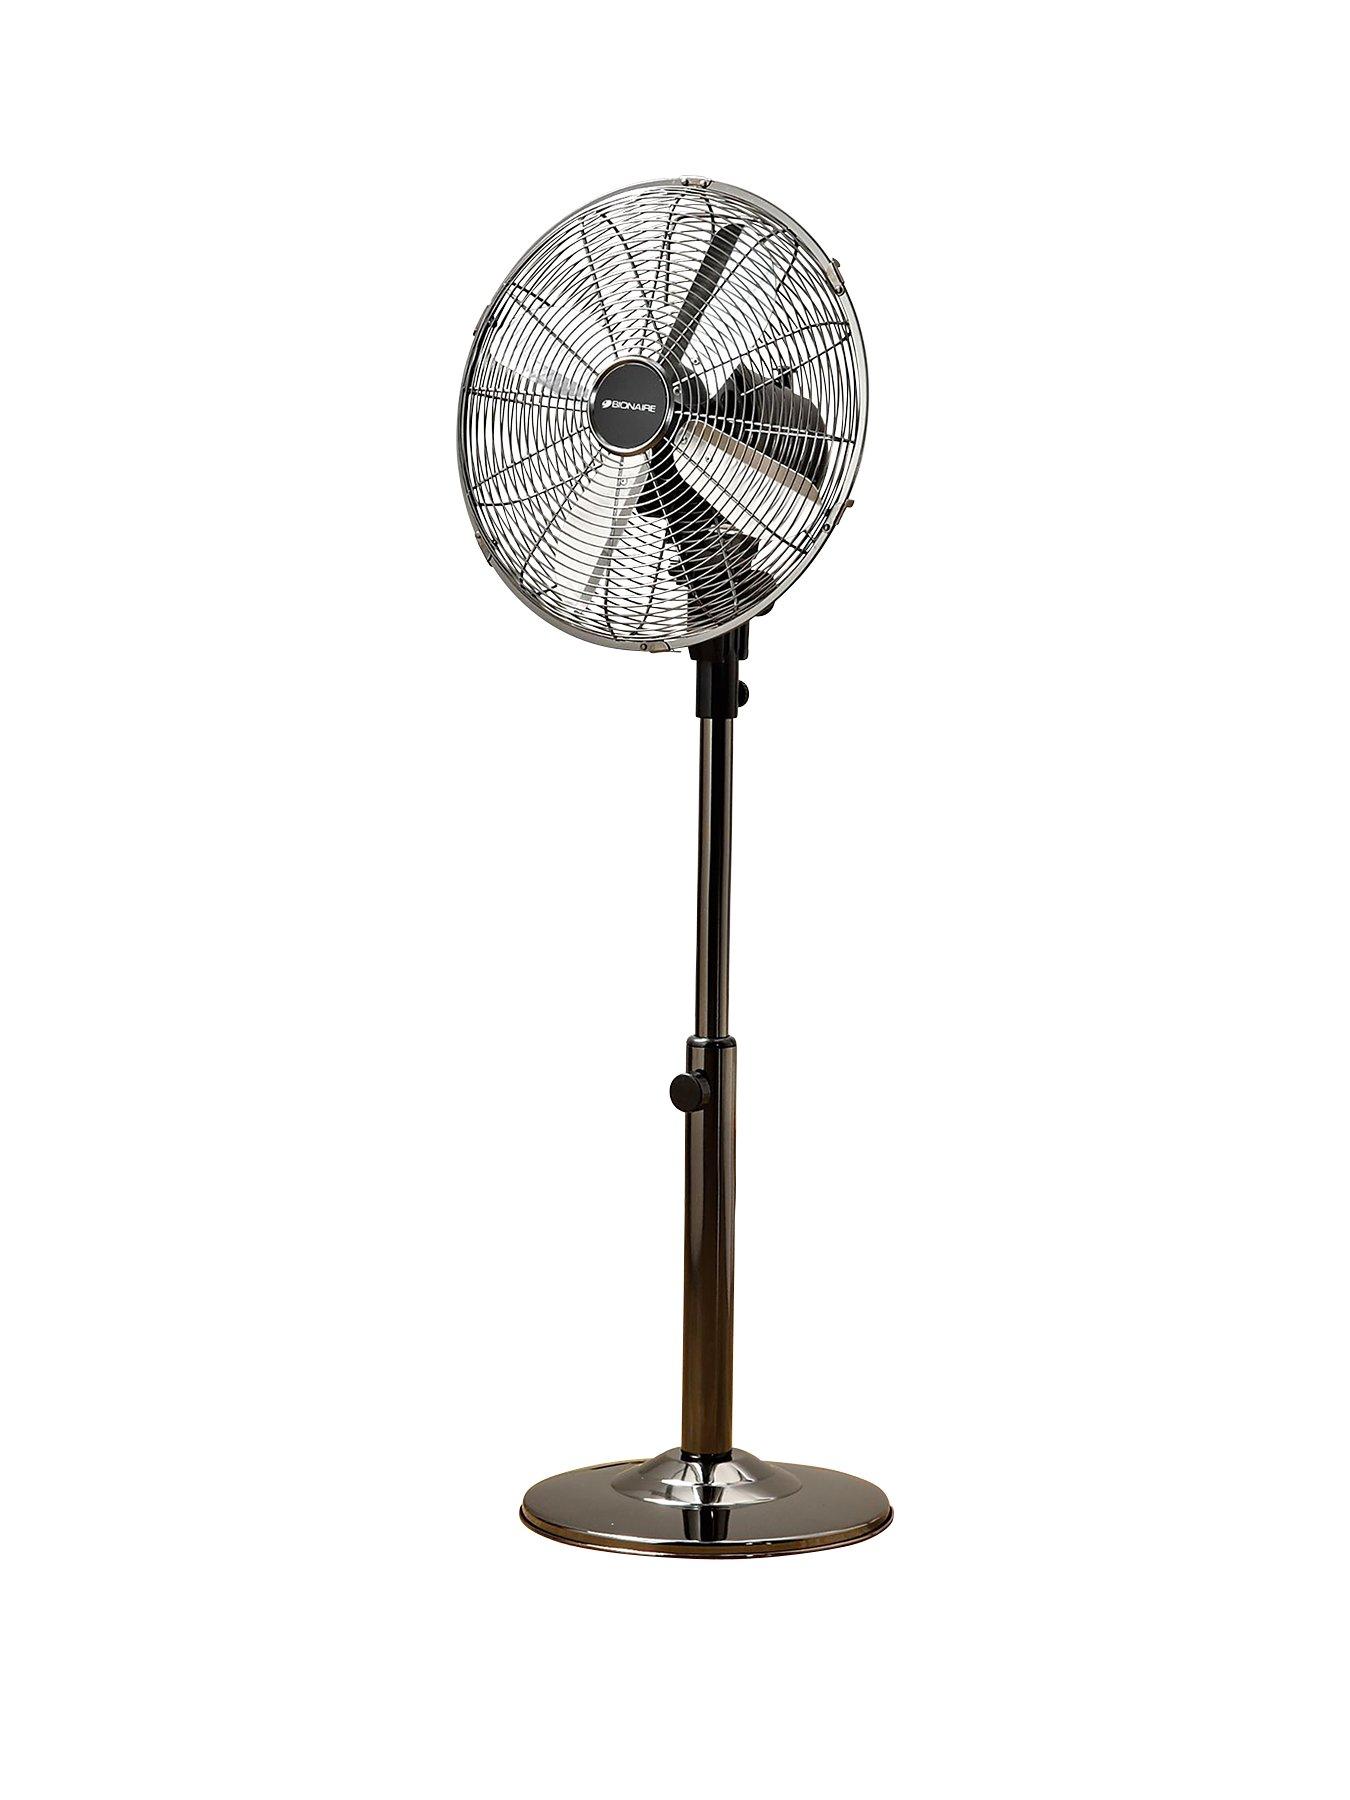 Bionaire Basf1516 Desk And Stand Fan Littlewoods Com